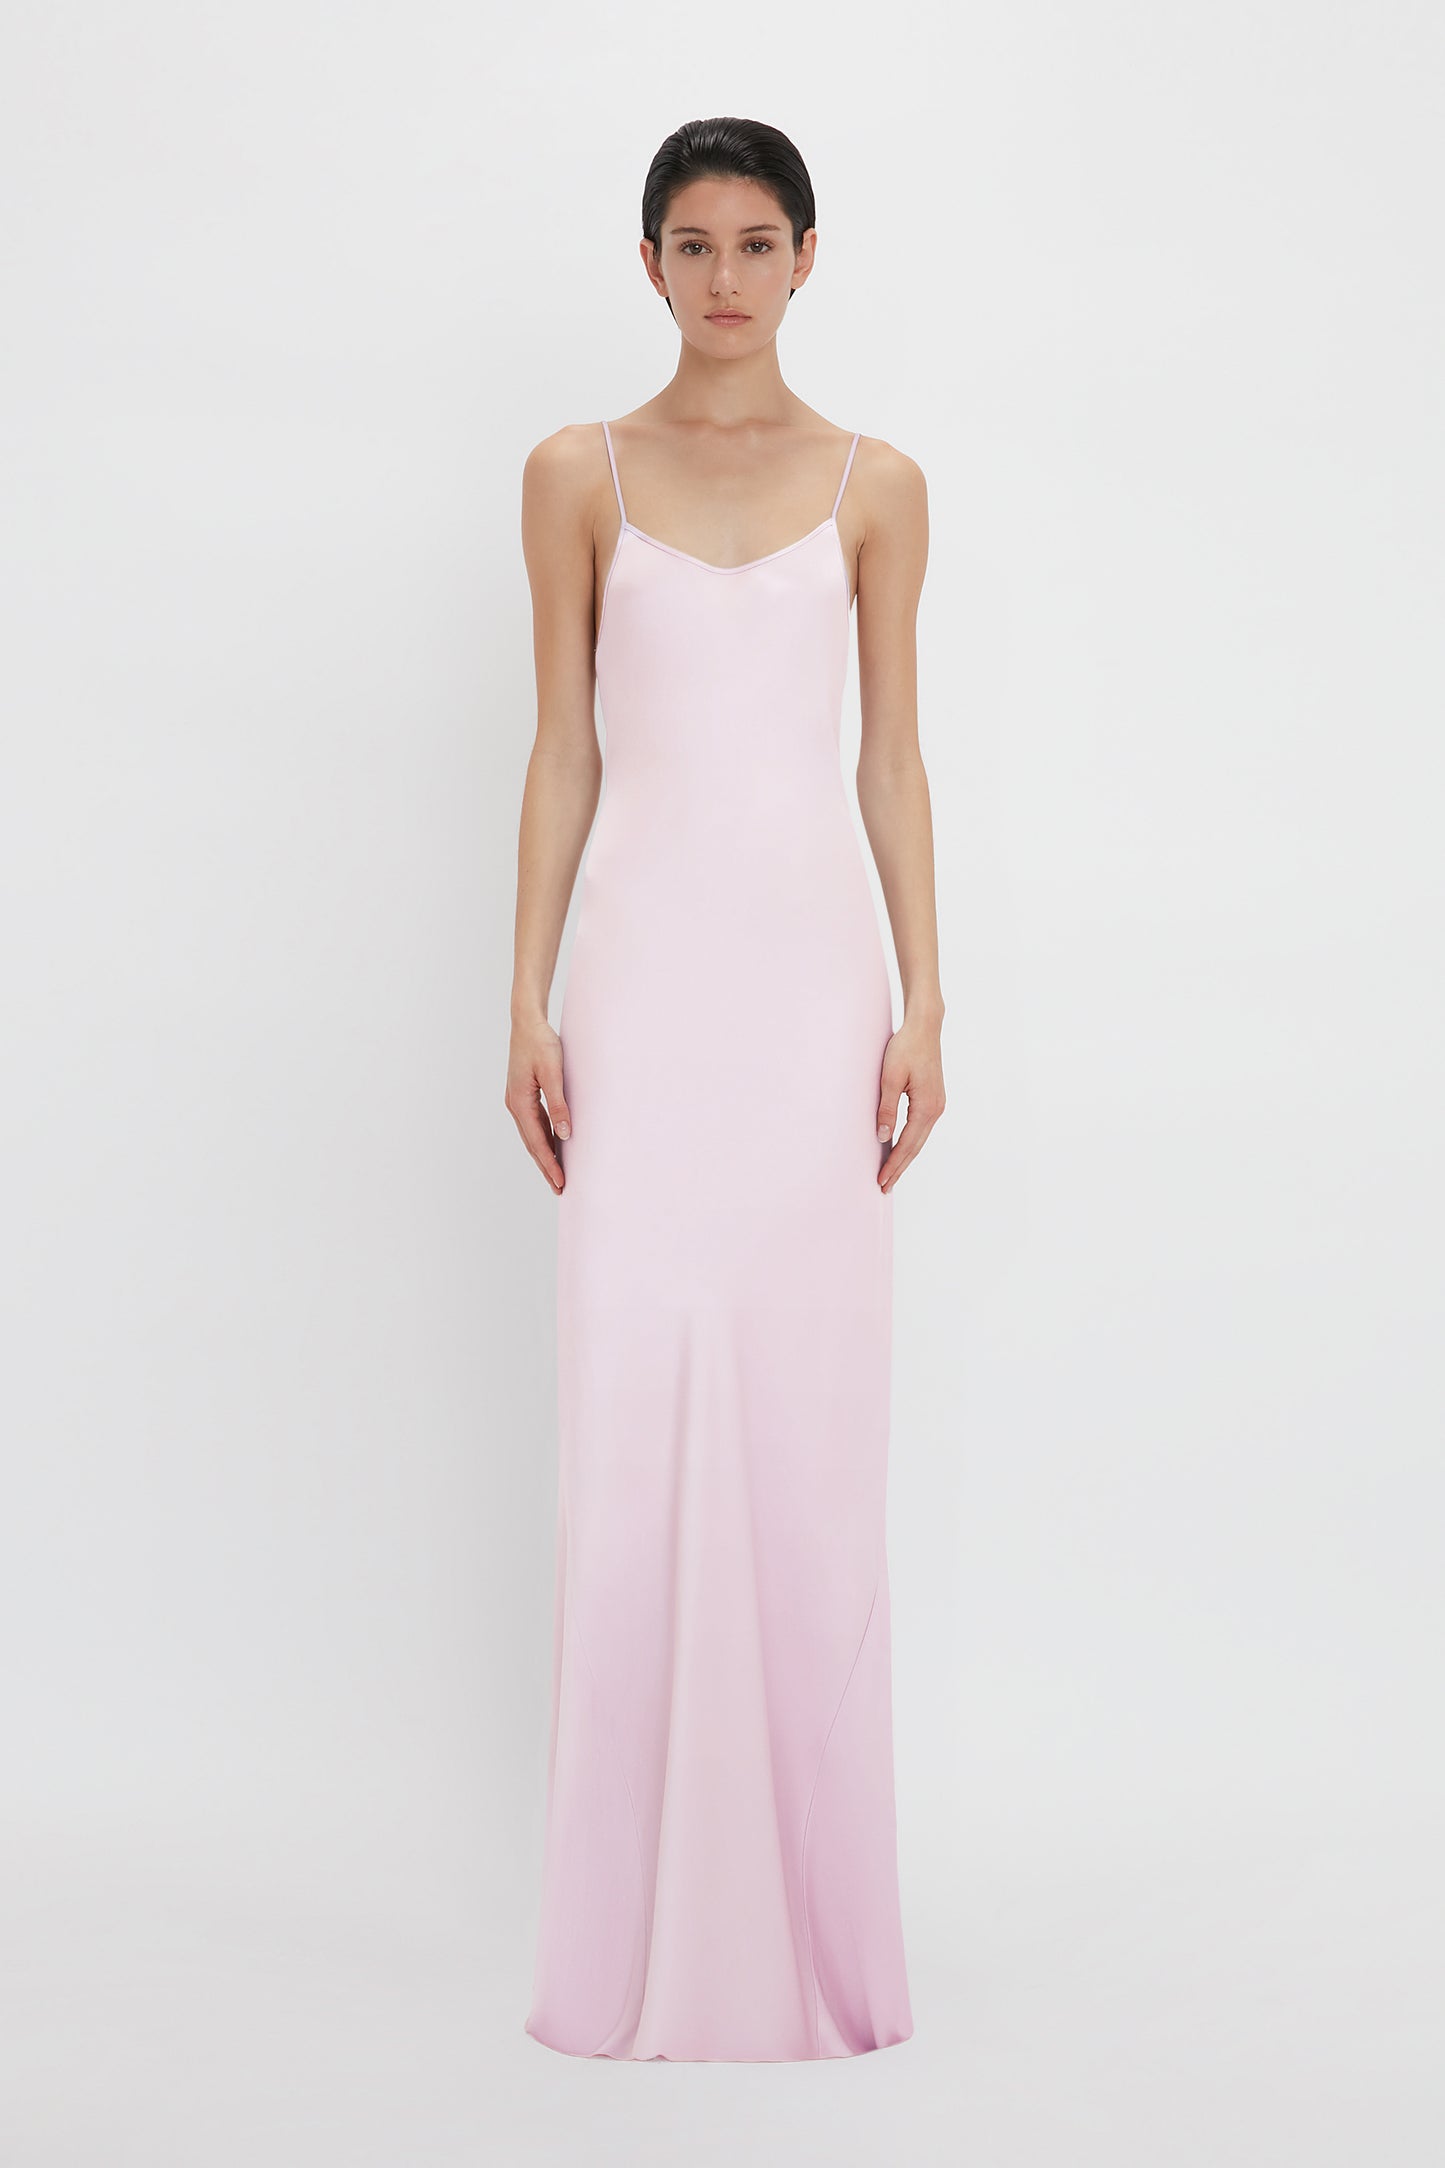 A woman stands against a white background wearing a long, light pink Low Back Cami Floor-Length Dress In Rosa by Victoria Beckham with thin straps.